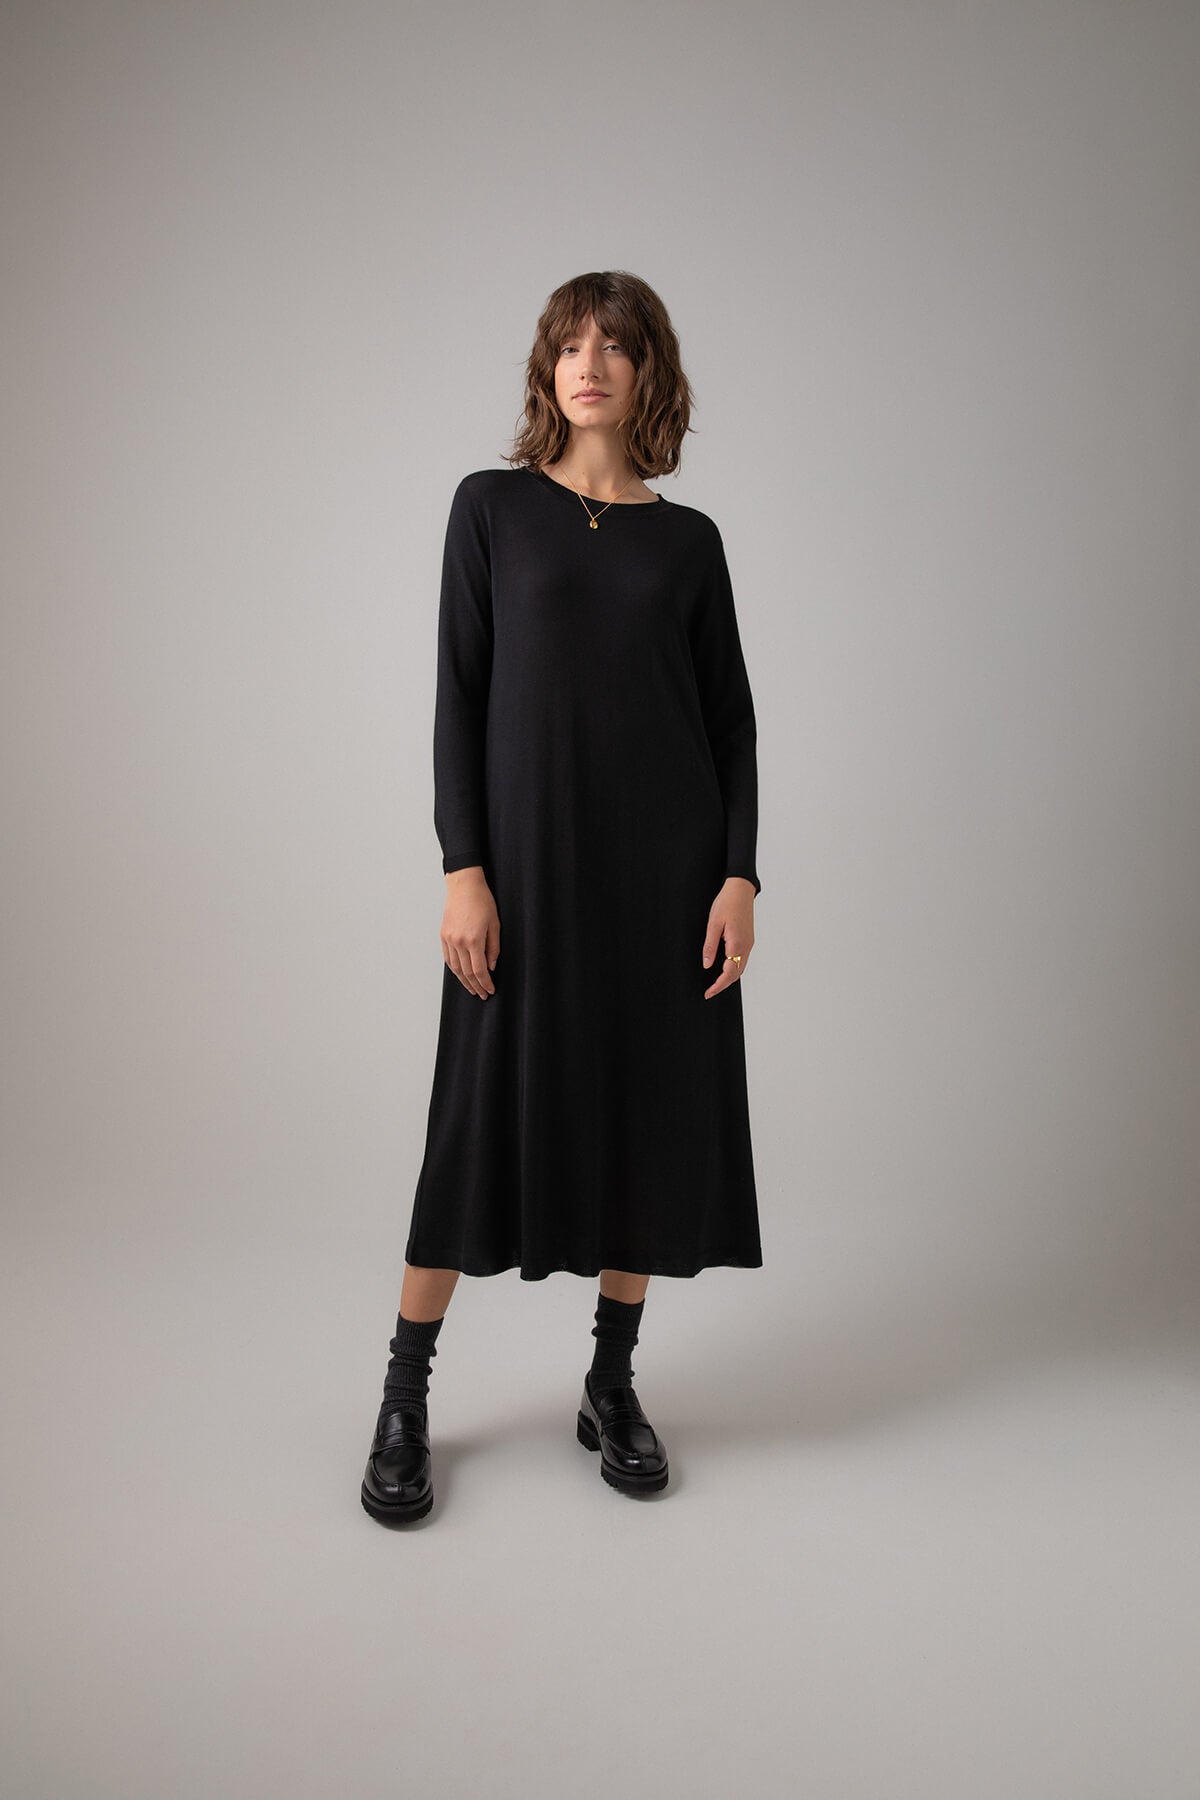 Johnstons of Elgin Women's Superfine Merino Belted T-Shirt Dress in Black worn unbelted with Black Socks & Shoes on a grey background KDI00685SA7131